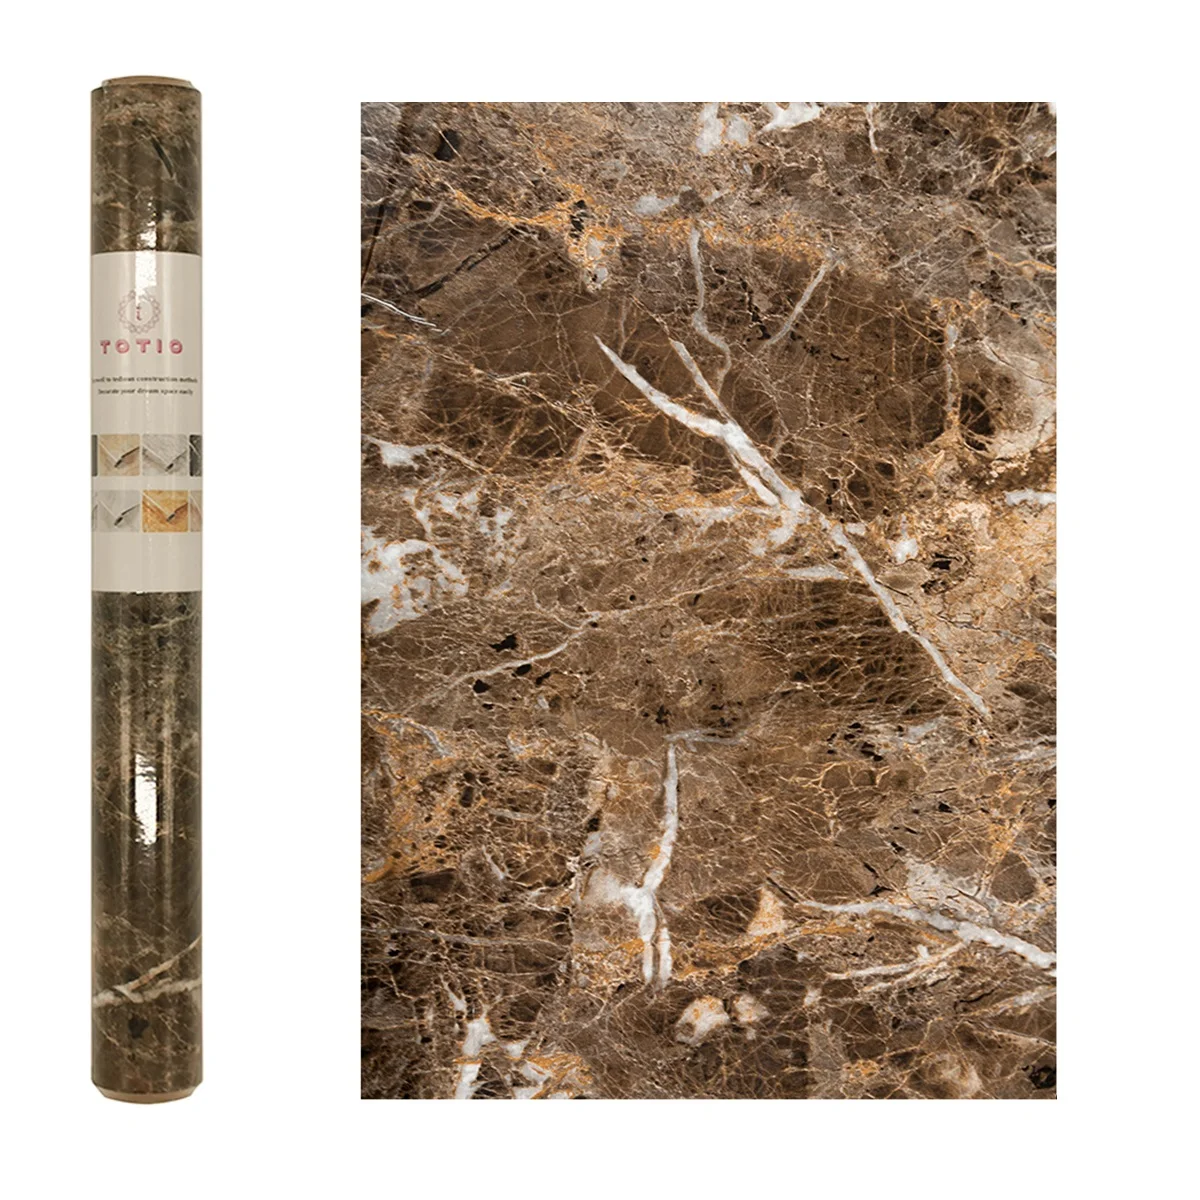 TOTIO Brown Marble Self Ahesive Wallpaper Peel and Stick High Temperature Resistant Contact Paper Vinyl Wall Paper Home Decor infrared thermometer non contact pyrometer digital thermometers ir high precision laser temperature meter sensor humidity